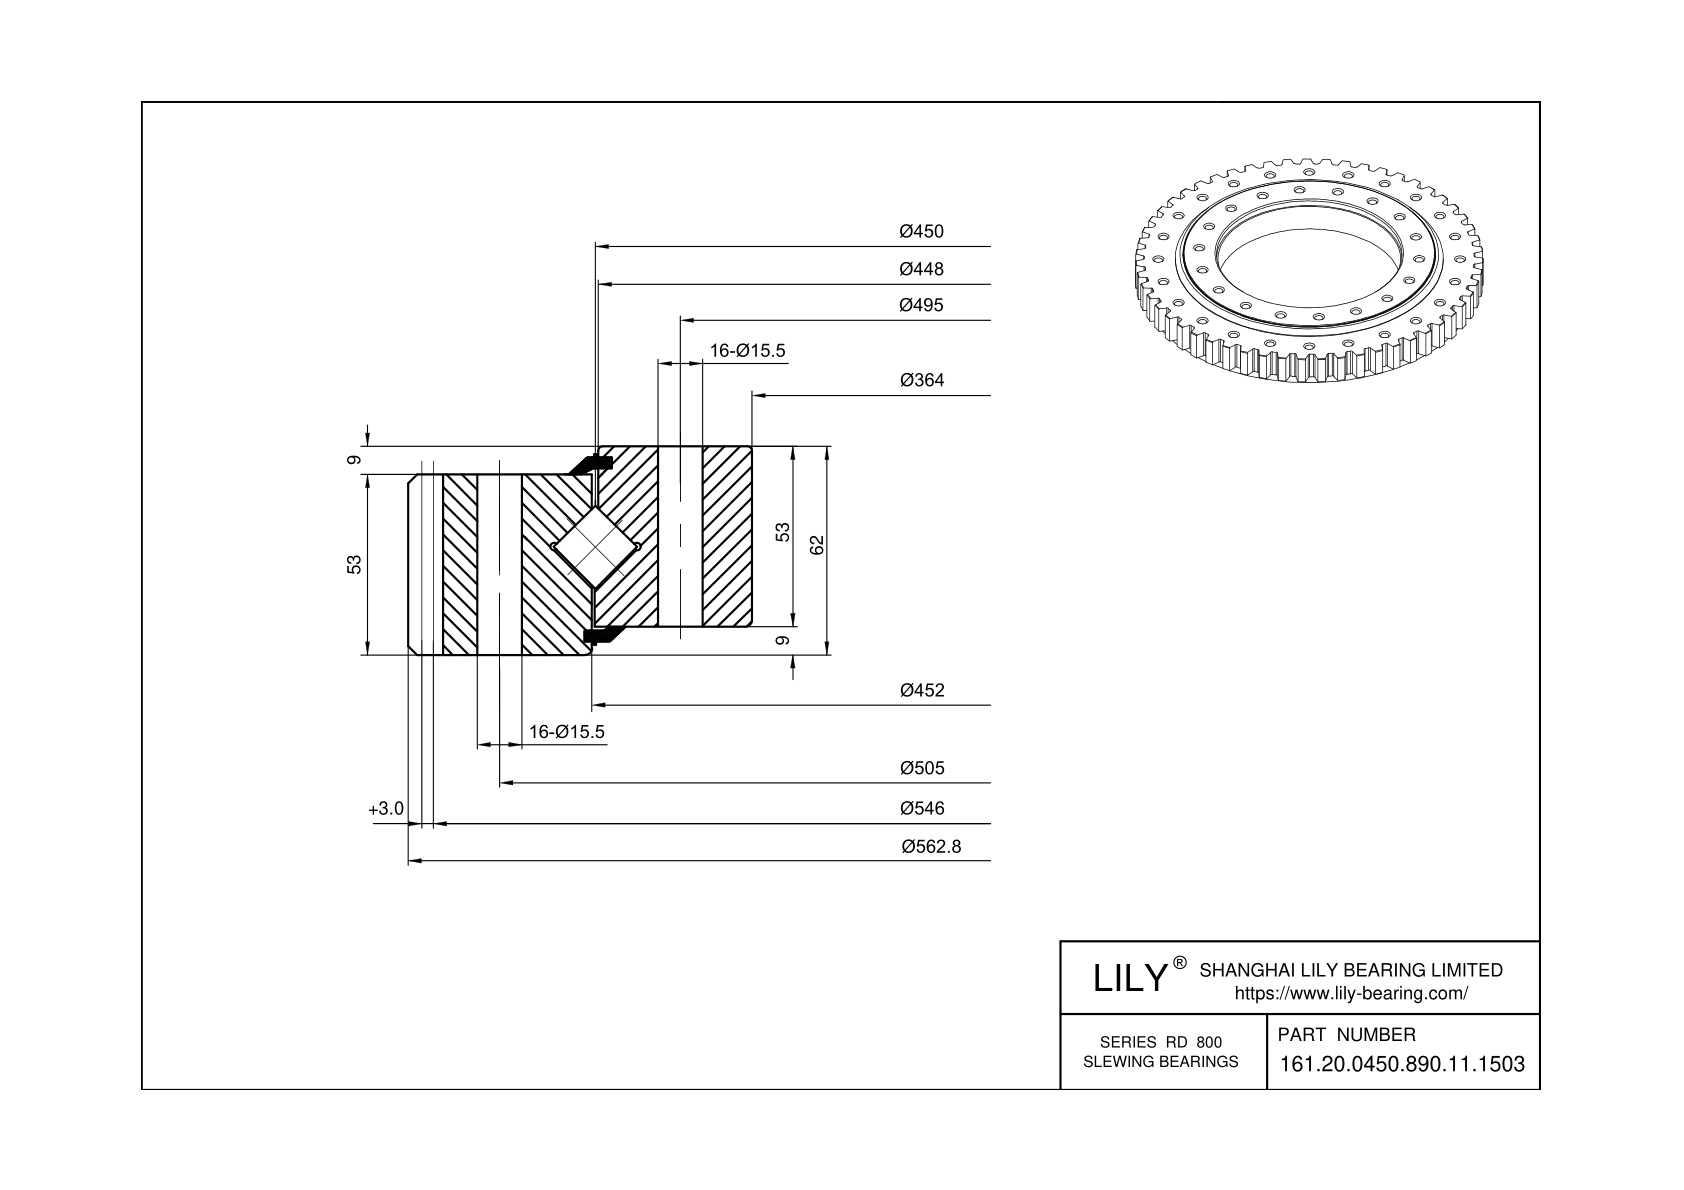 161.20.0450.890.11.1503 Cross Roller Slewing Ring Bearing cad drawing